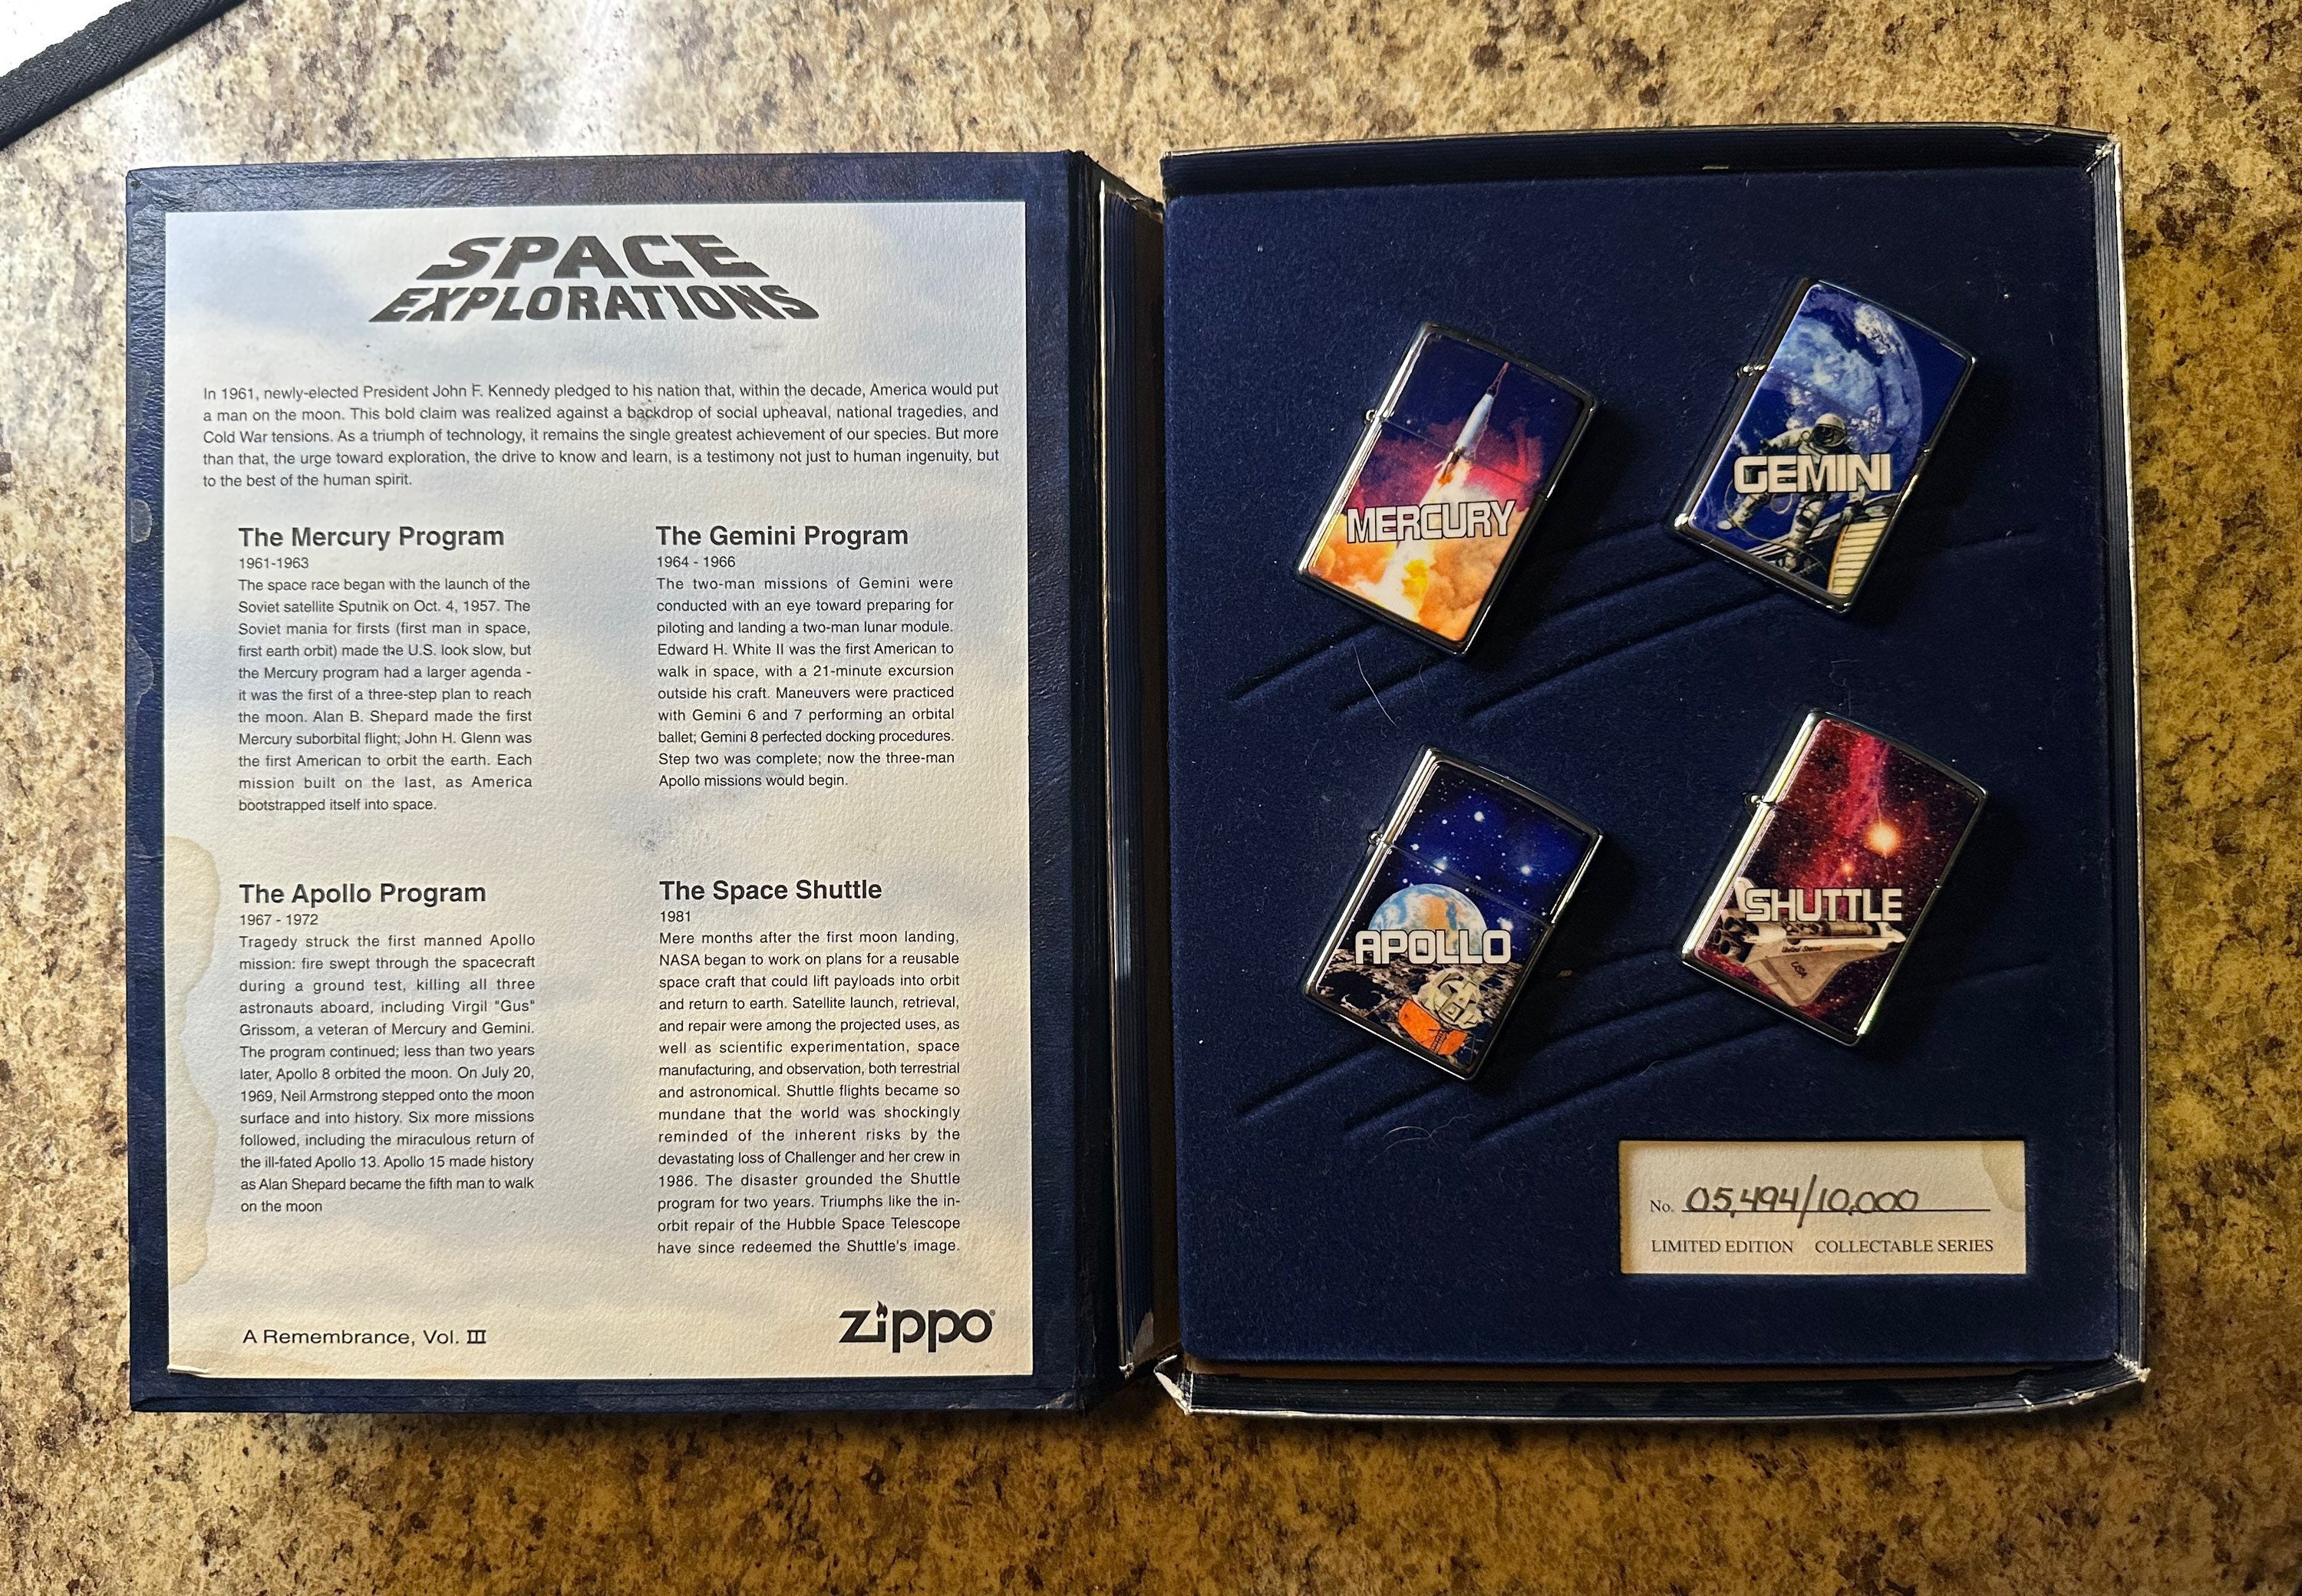 Zippo Space Explorations Limited Edition Set